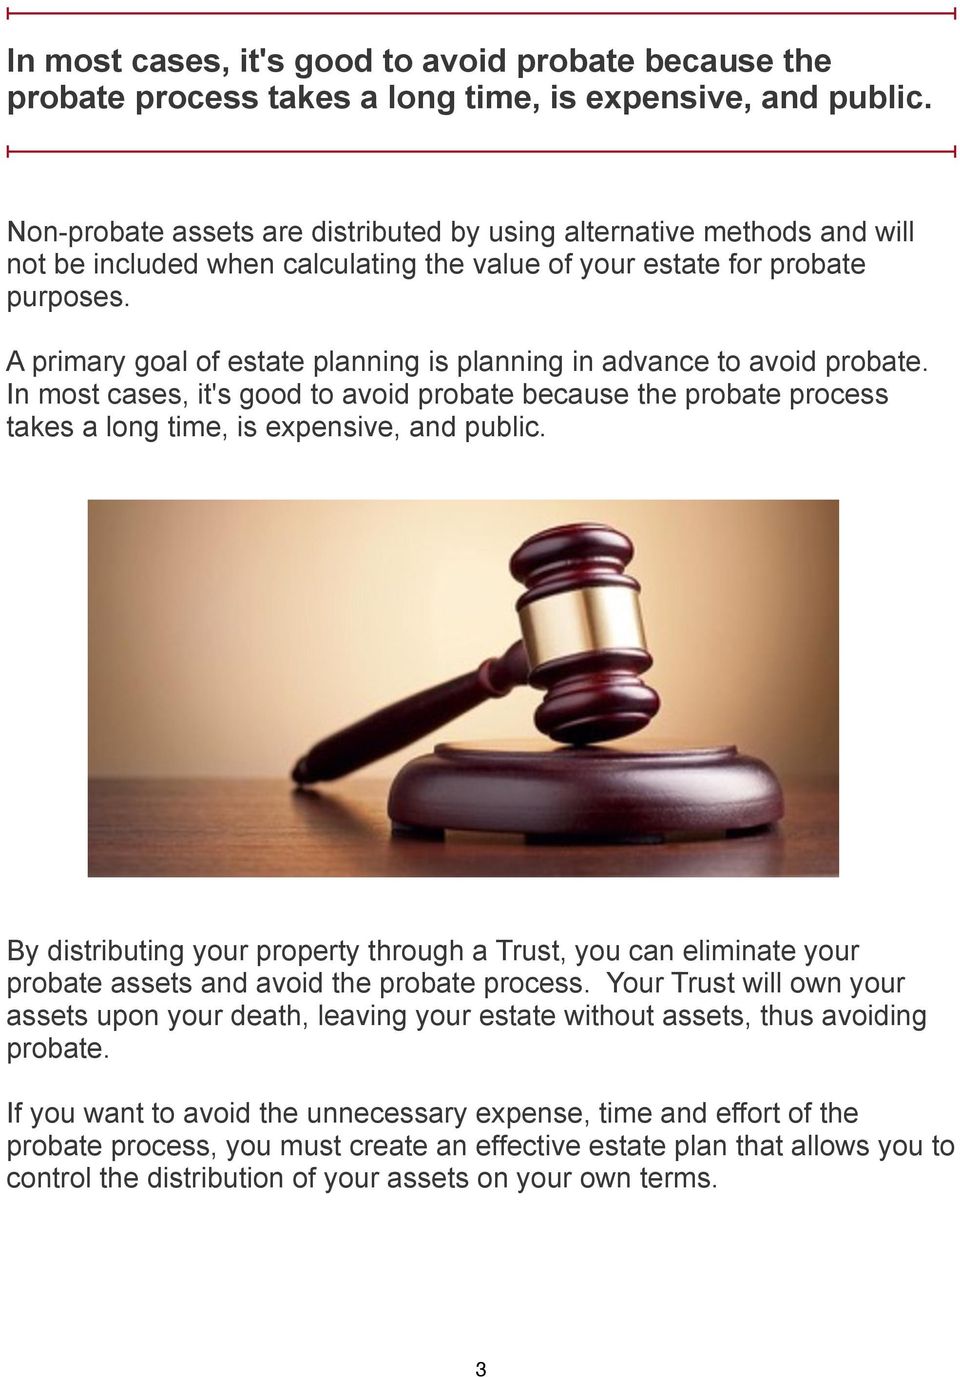 A primary goal of estate planning is planning in advance to avoid probate.  By distributing your property through a Trust, you can eliminate your probate assets and avoid the probate process.